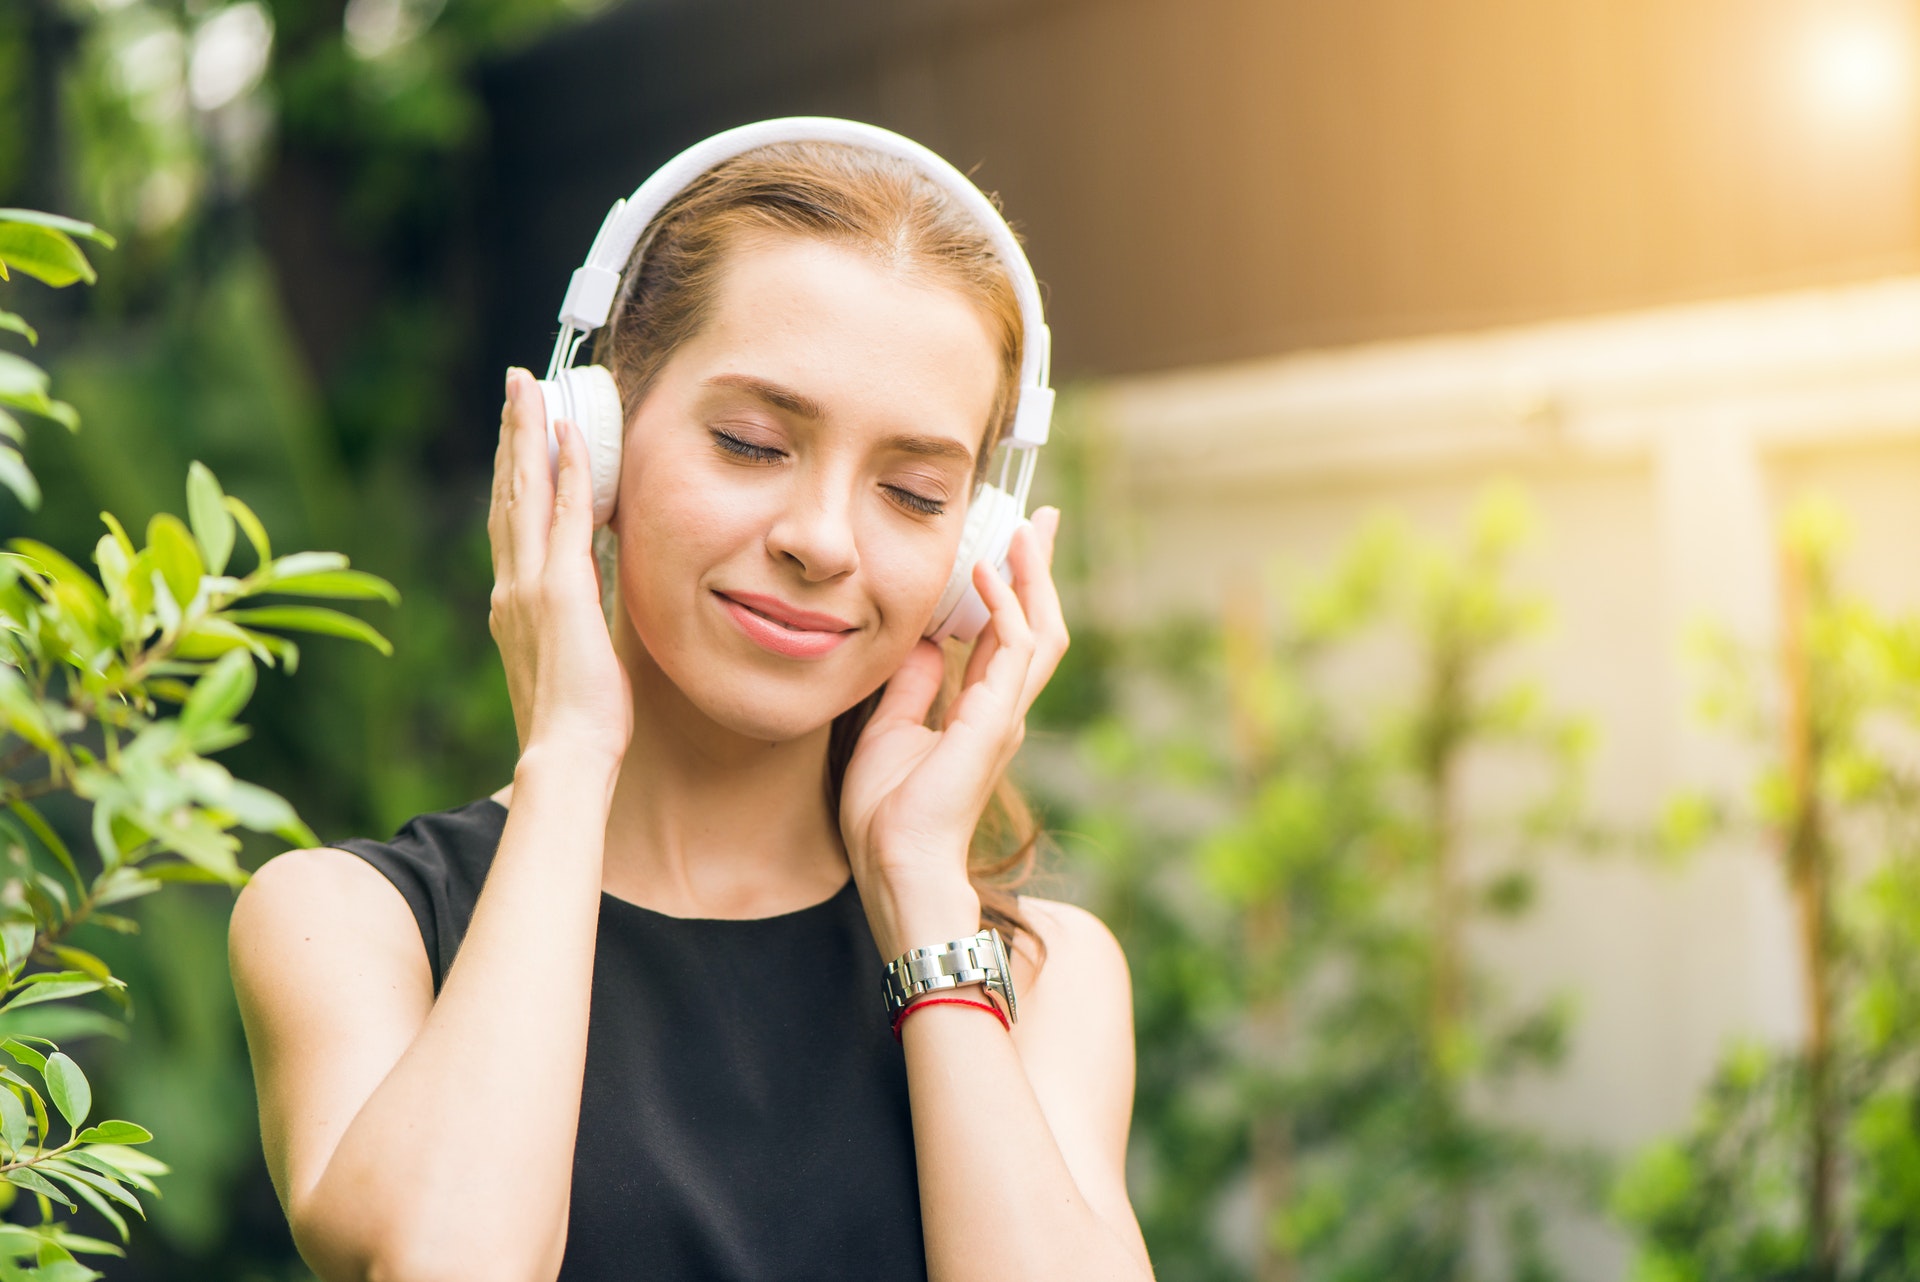 Woman listening to music looking happy - Mental Wellbeing Music